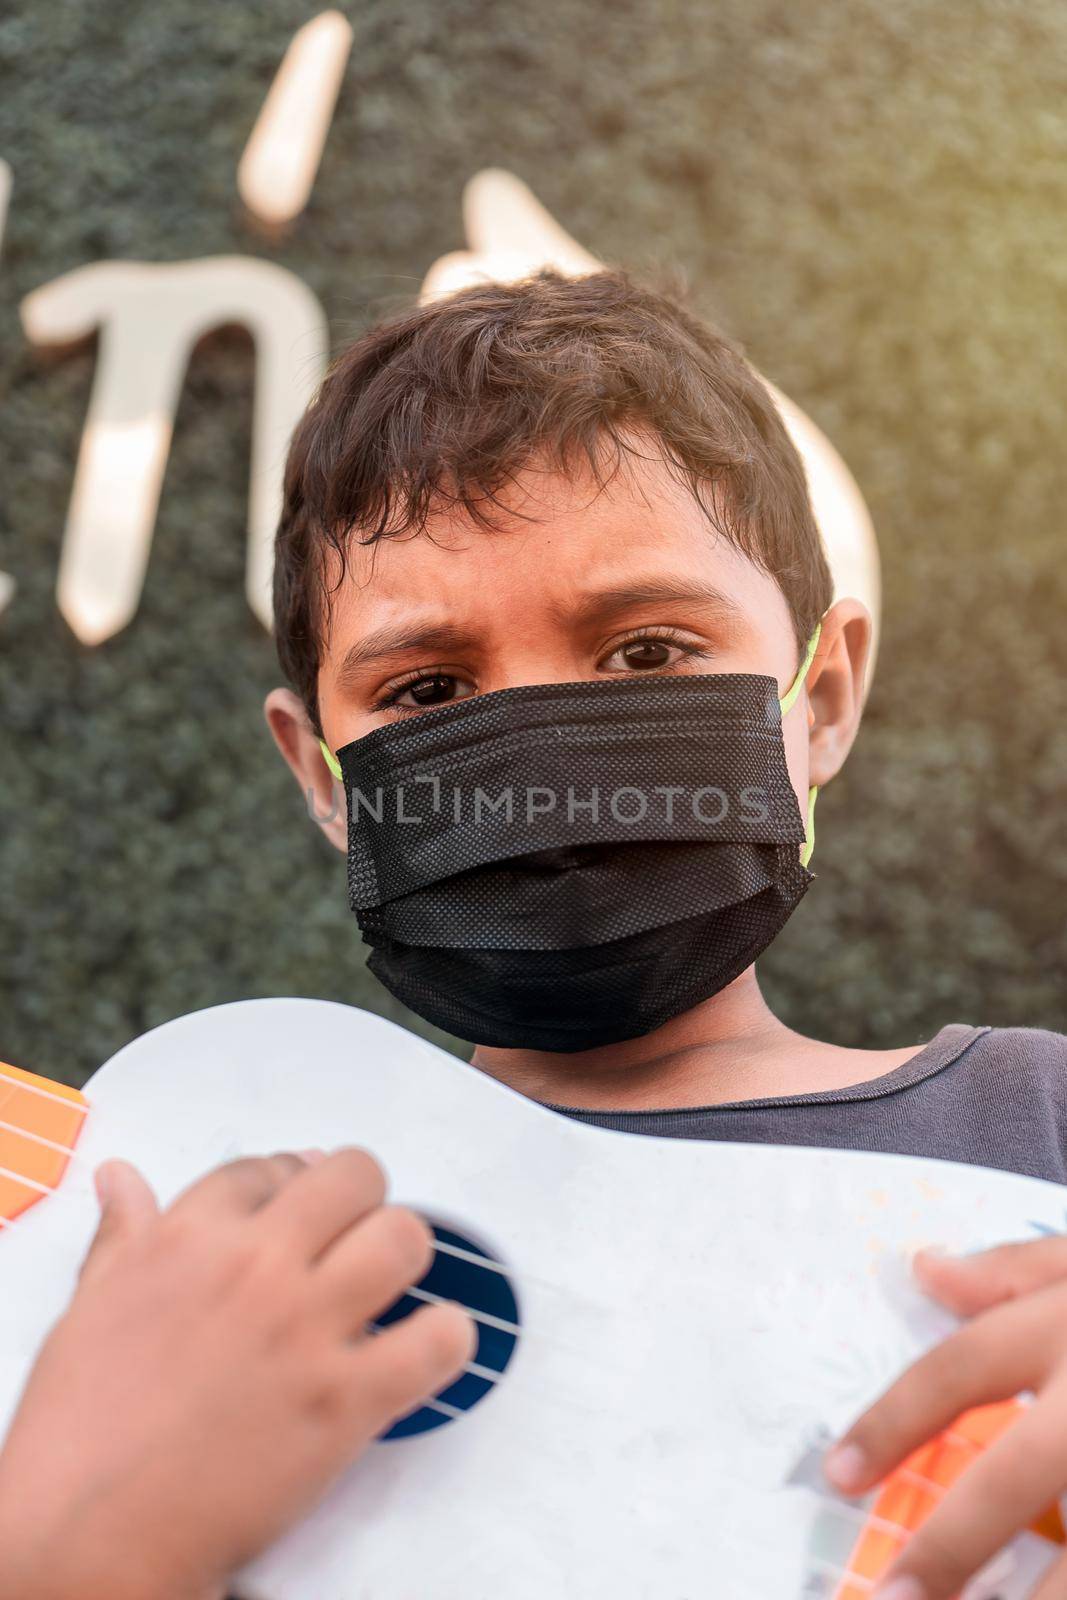 Vertical photo of a Latin boy with a medical mask outdoors looking at the camera and with a ukulele in his hands.